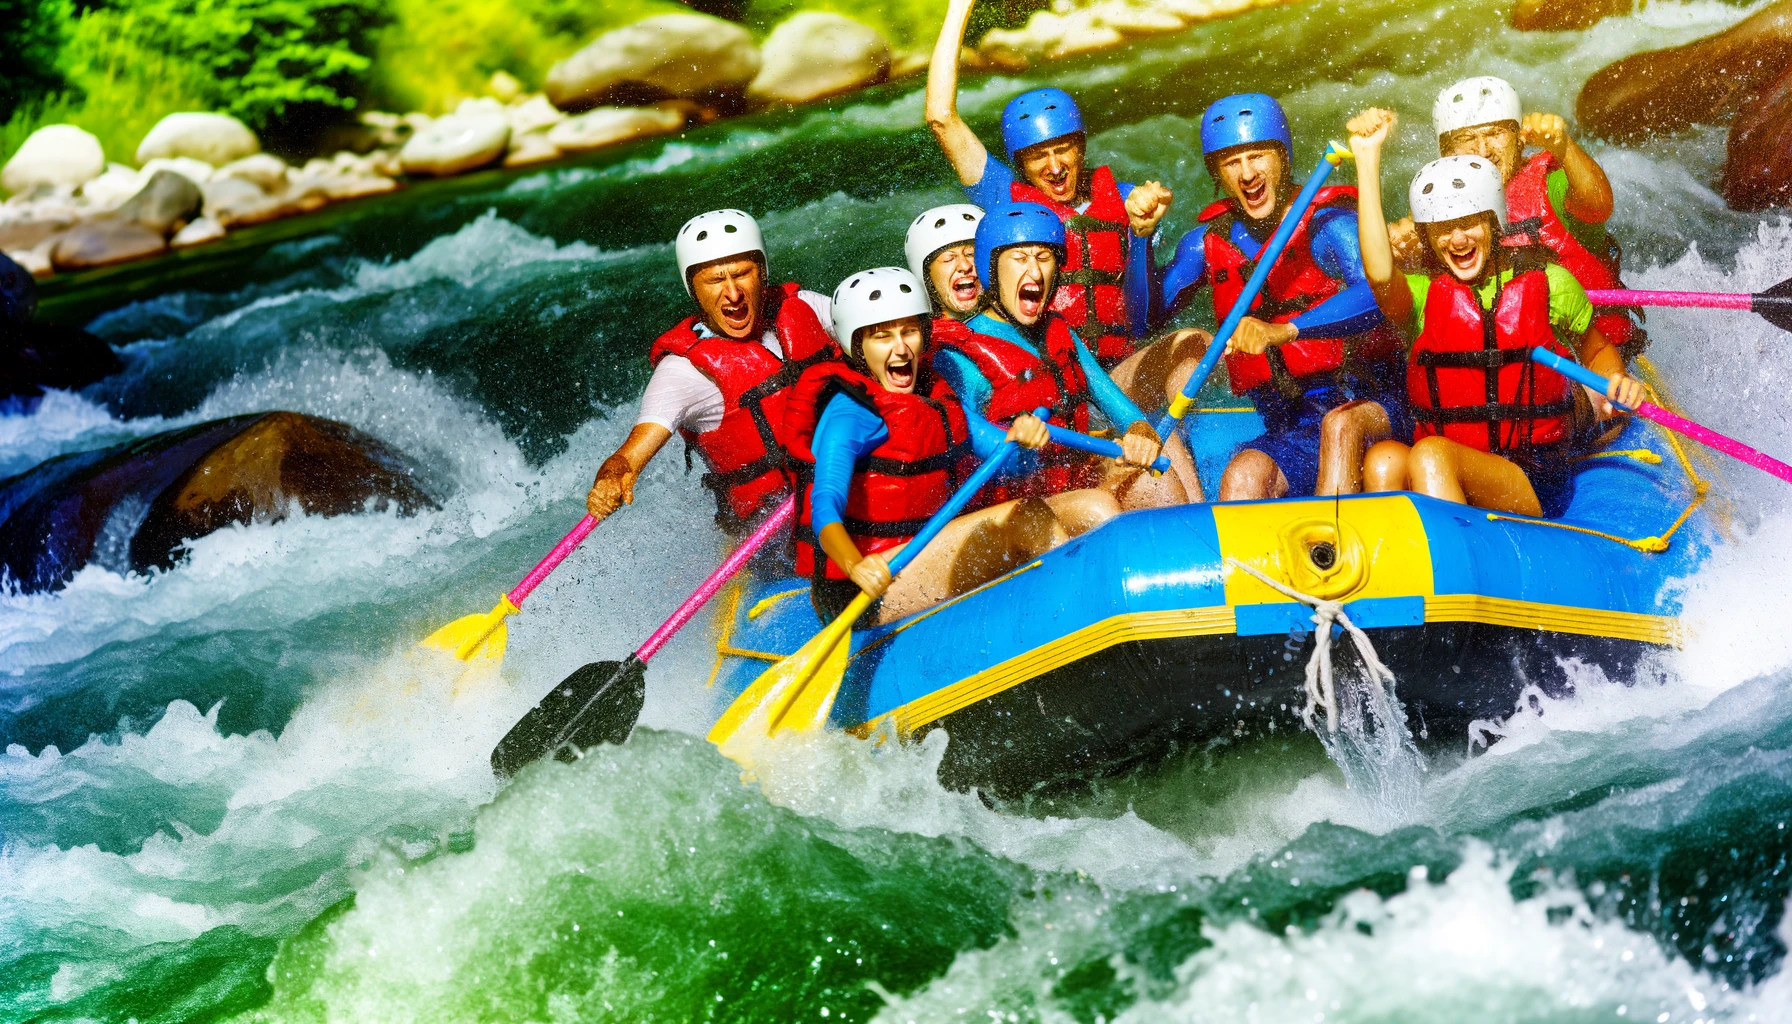 rafting down a tumultuous river, navigating through rapids with expressions of exhilaration and teamwork